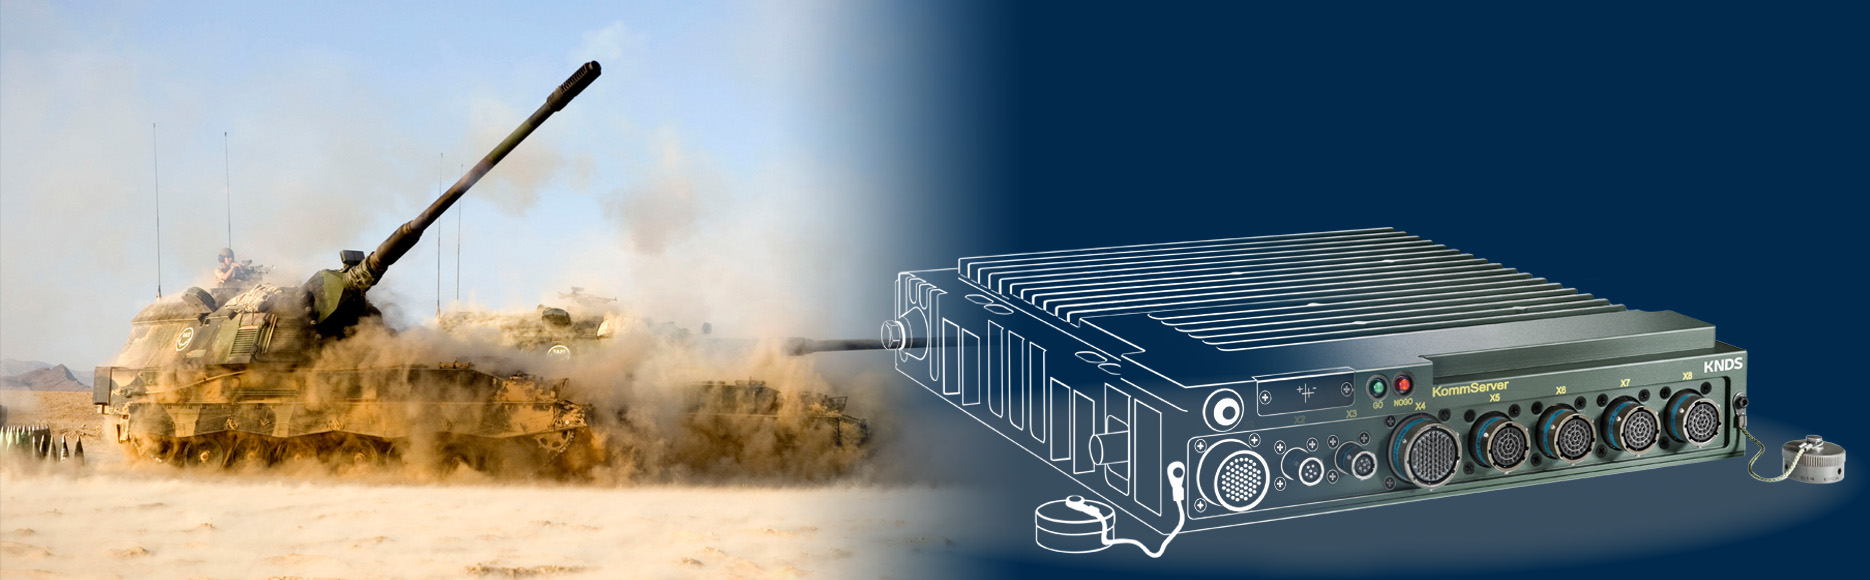 PzH2000 armoured howitzer in the desert with dust cloud and key visual of the ATM KommServer